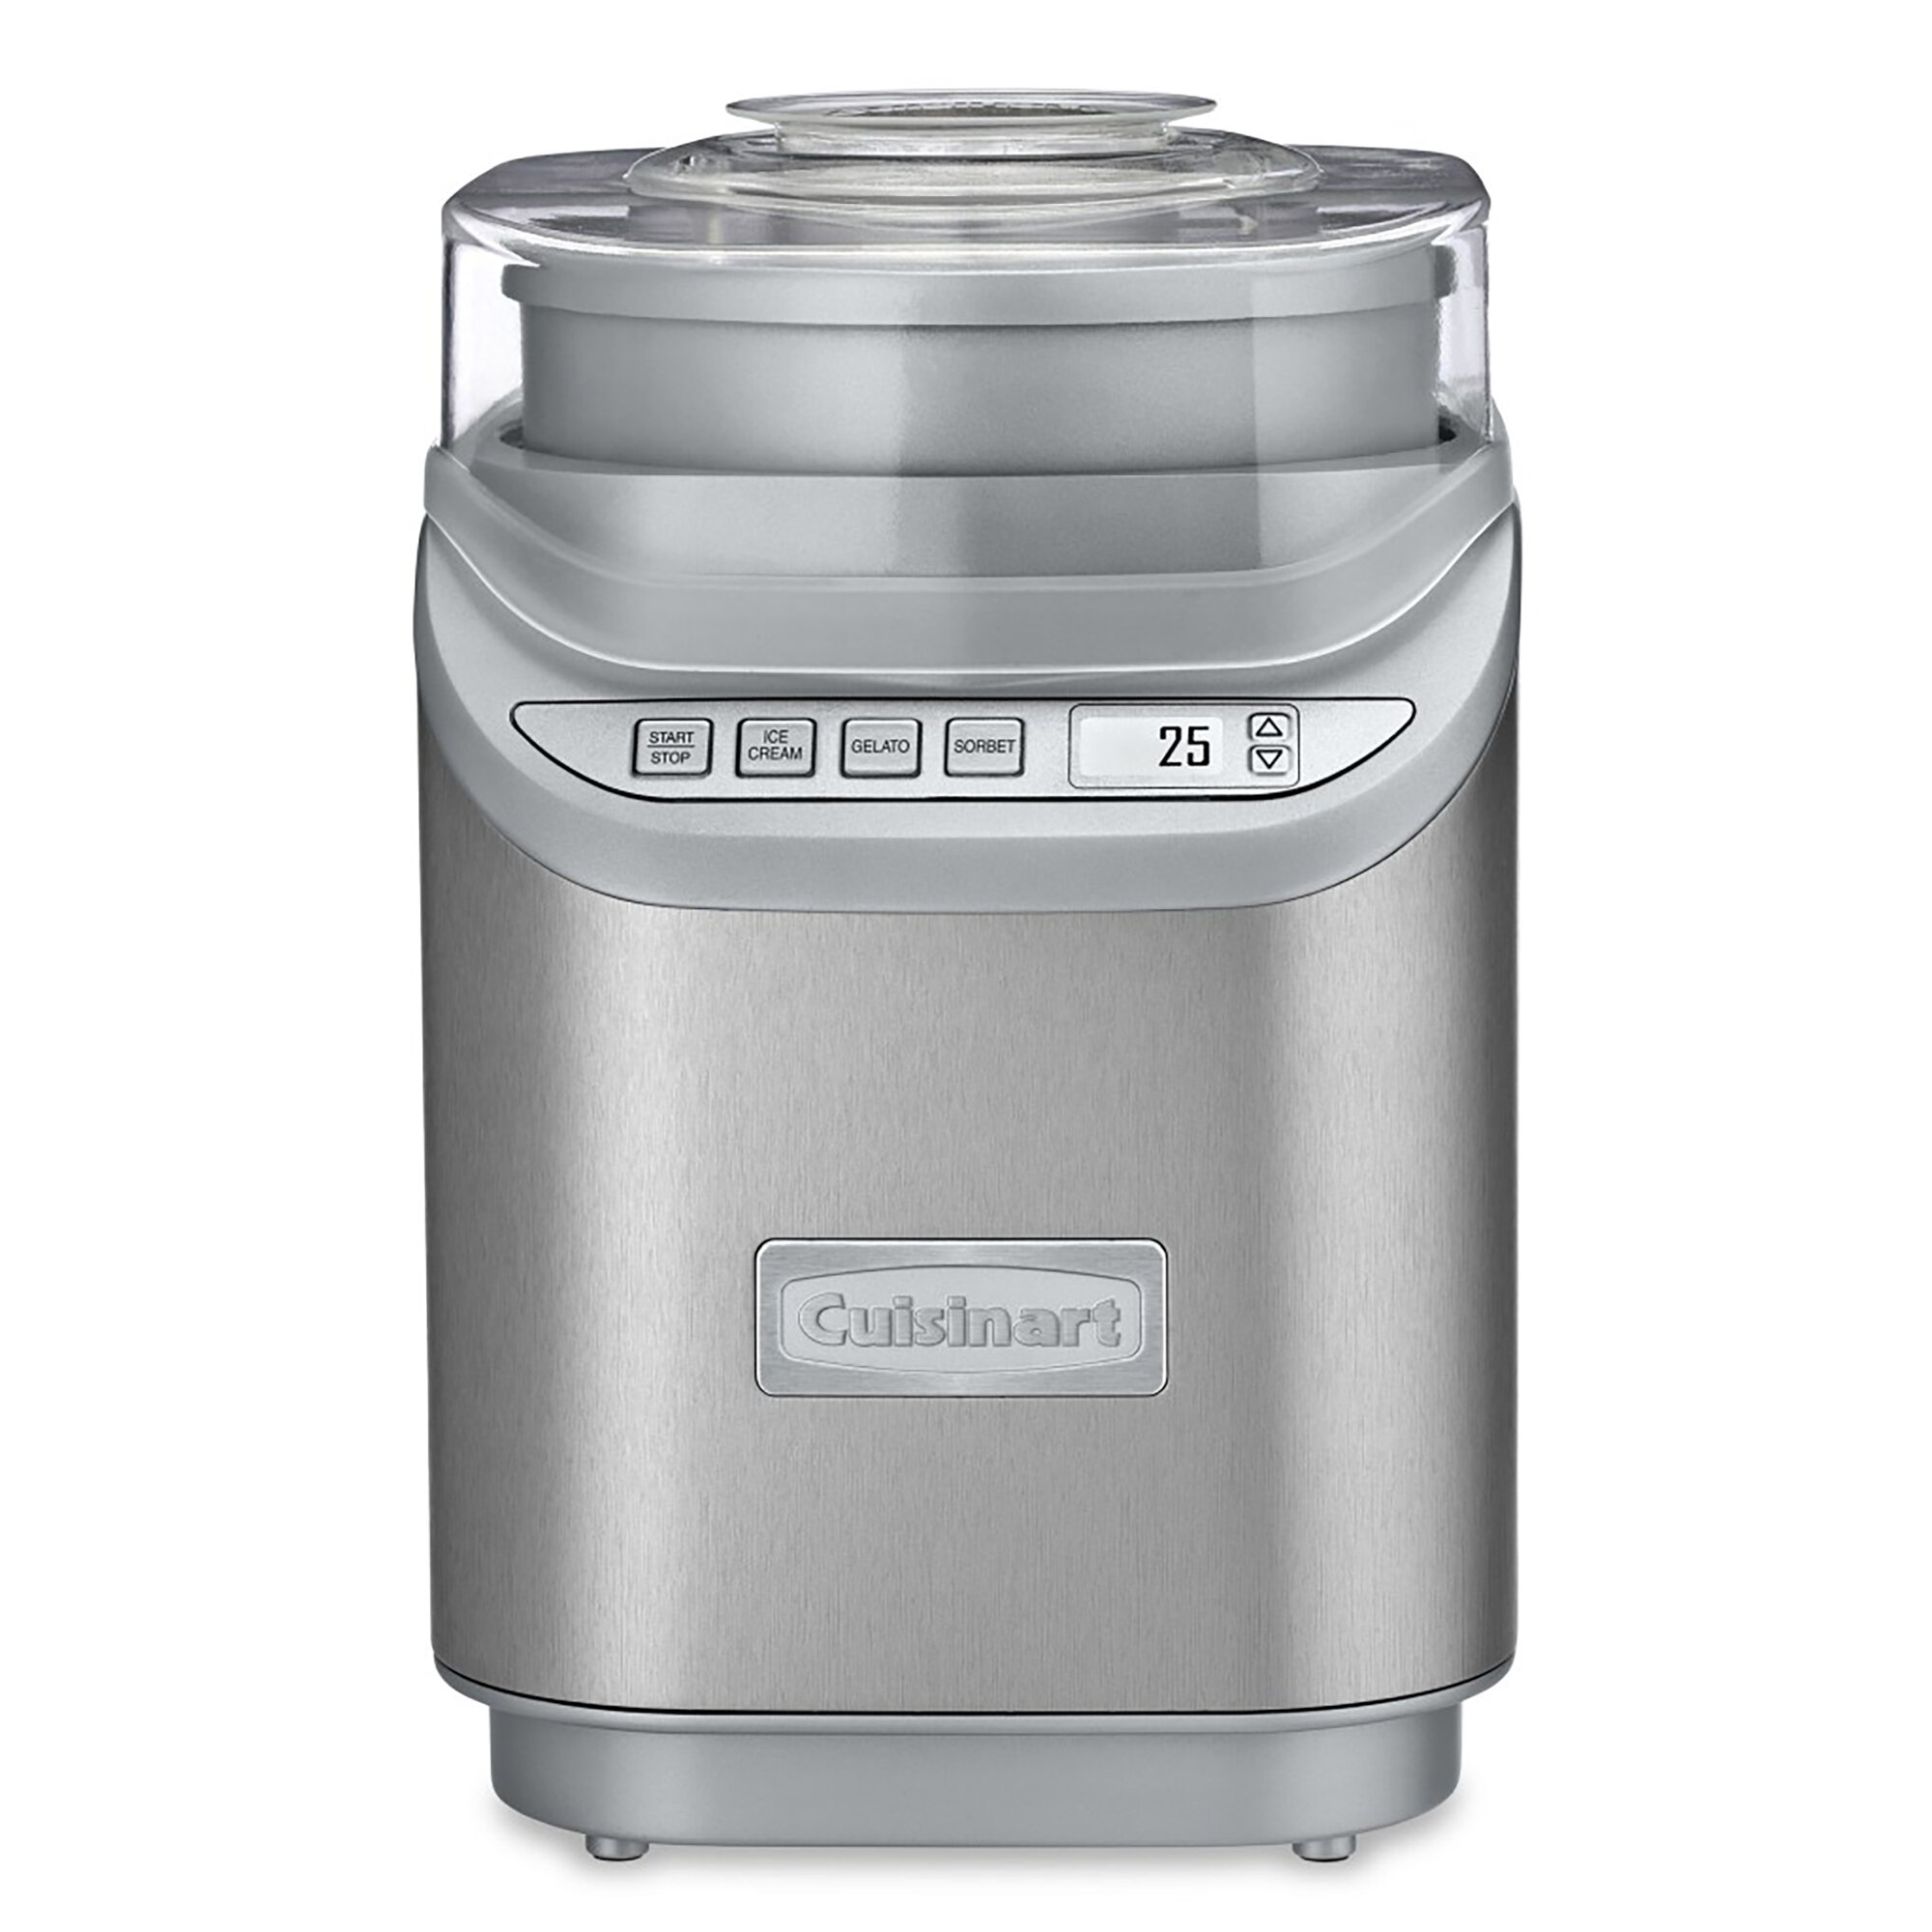 How To Use Cuisinart Ice Cream Maker